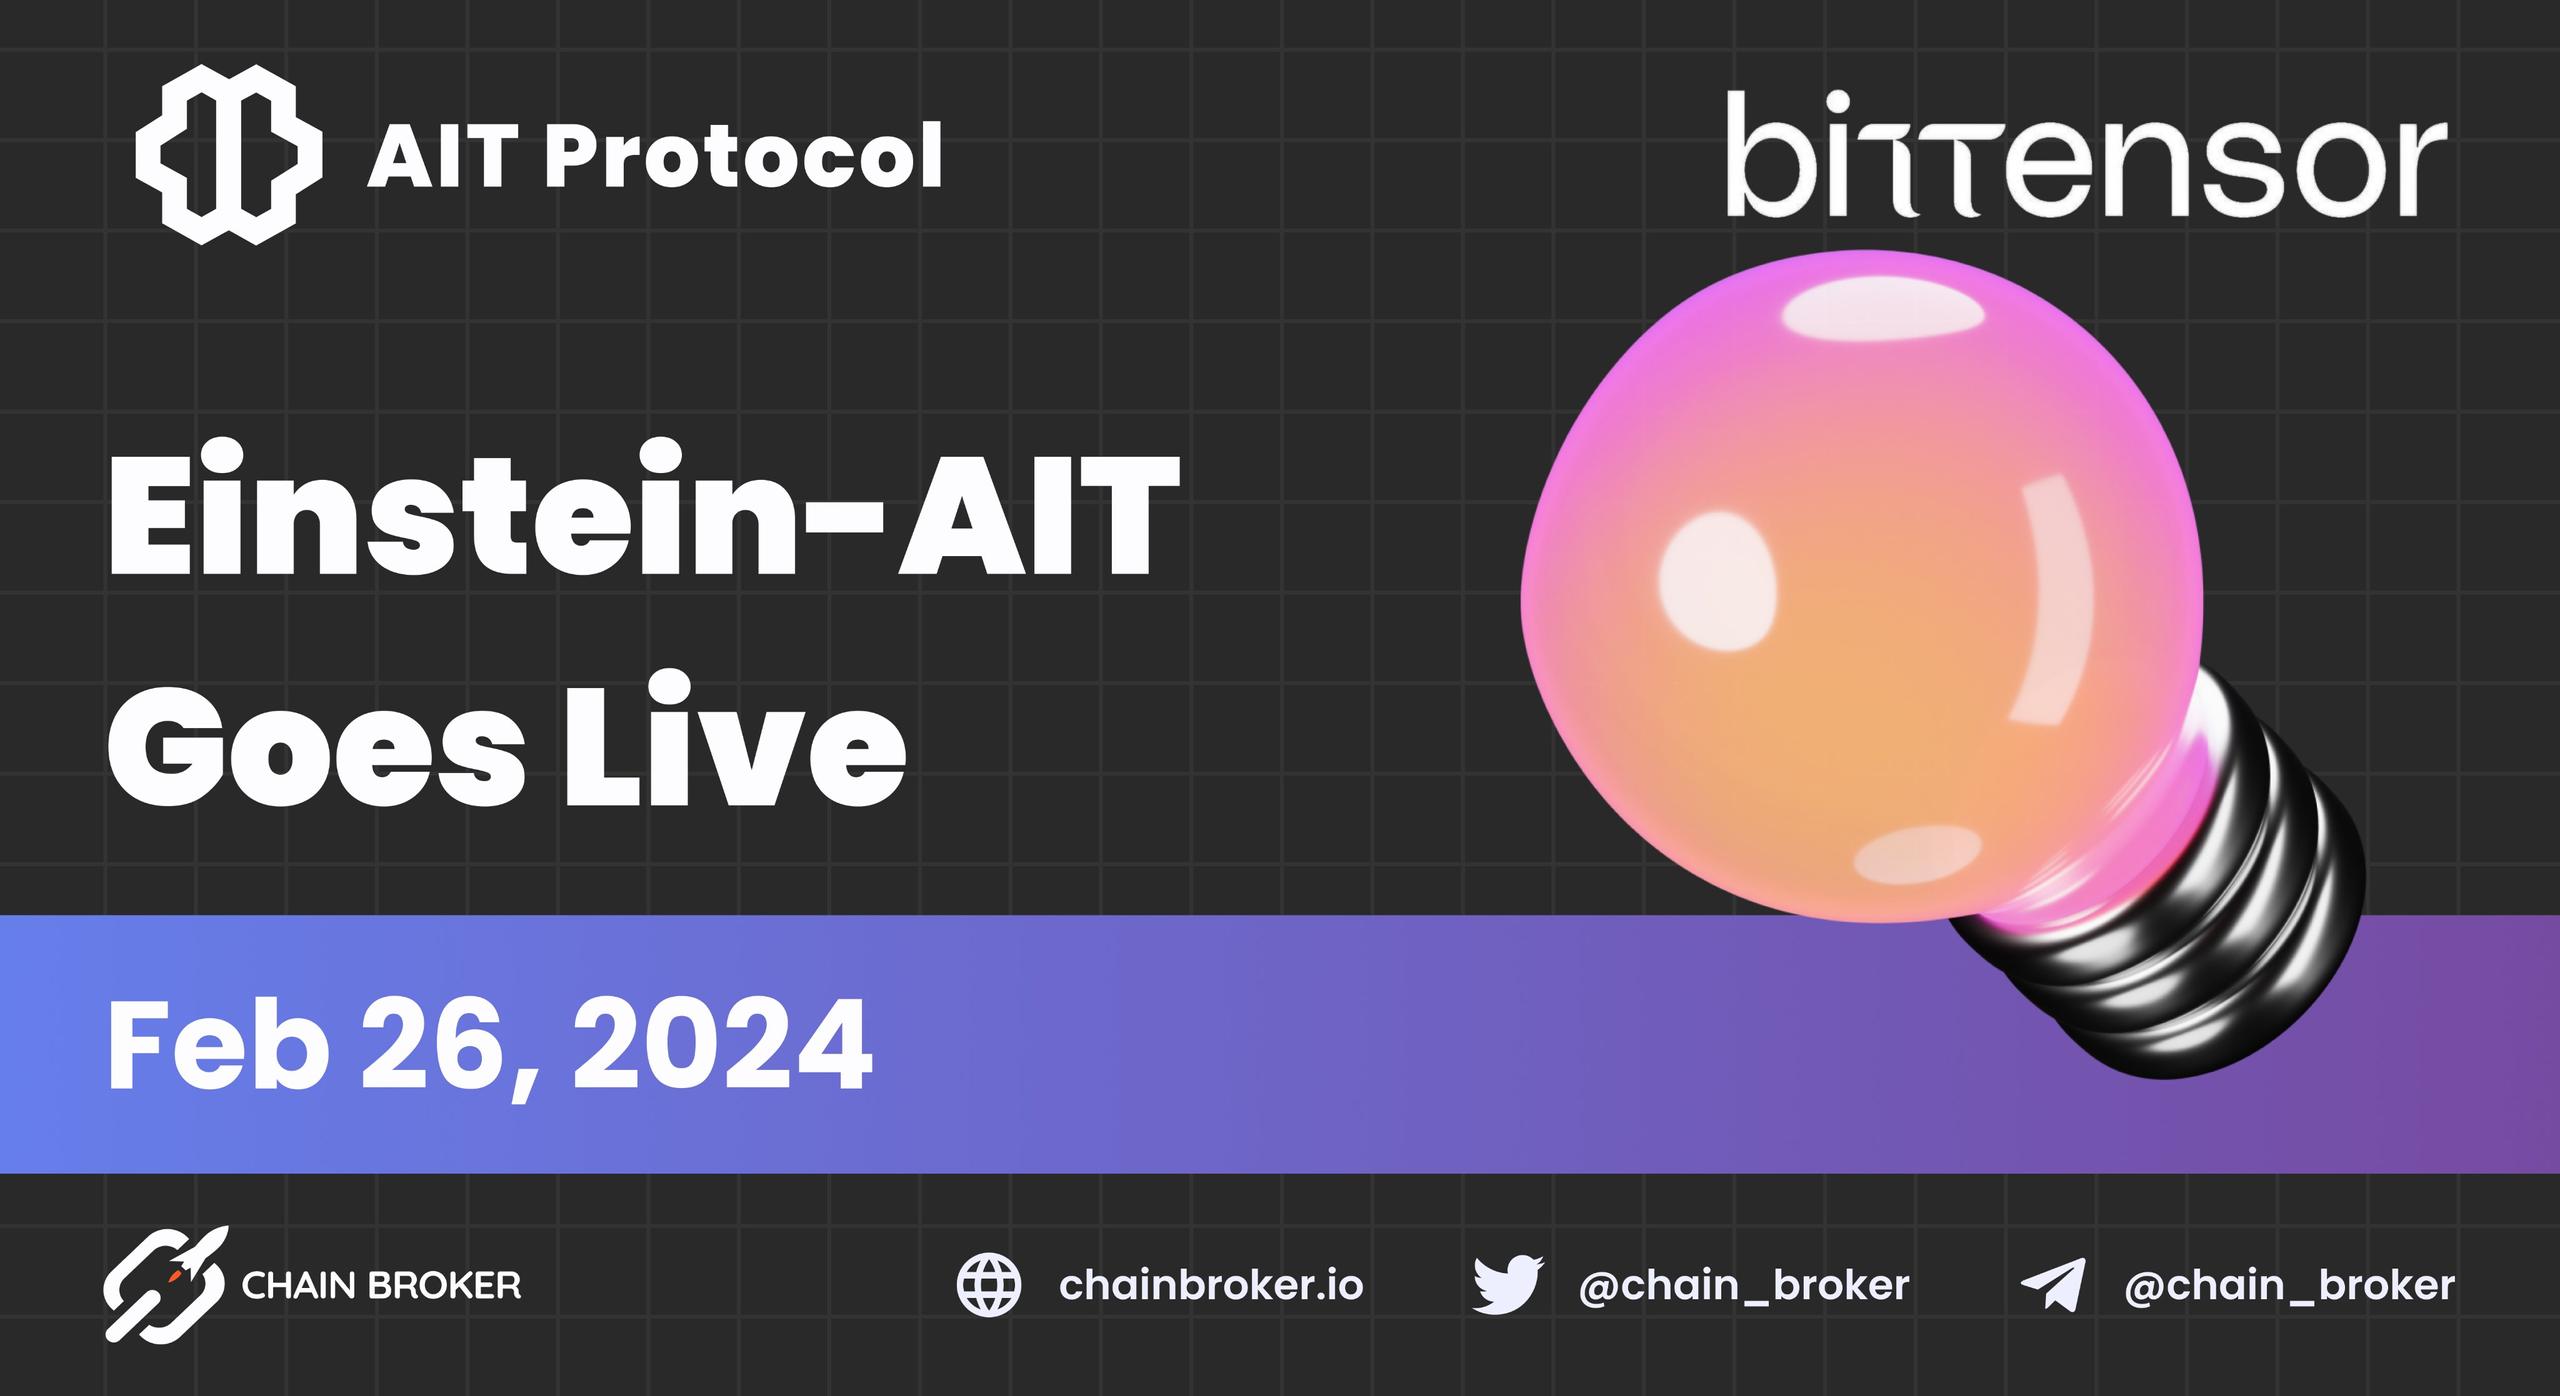 AIT Protocol launches their first subnet on Bittensor